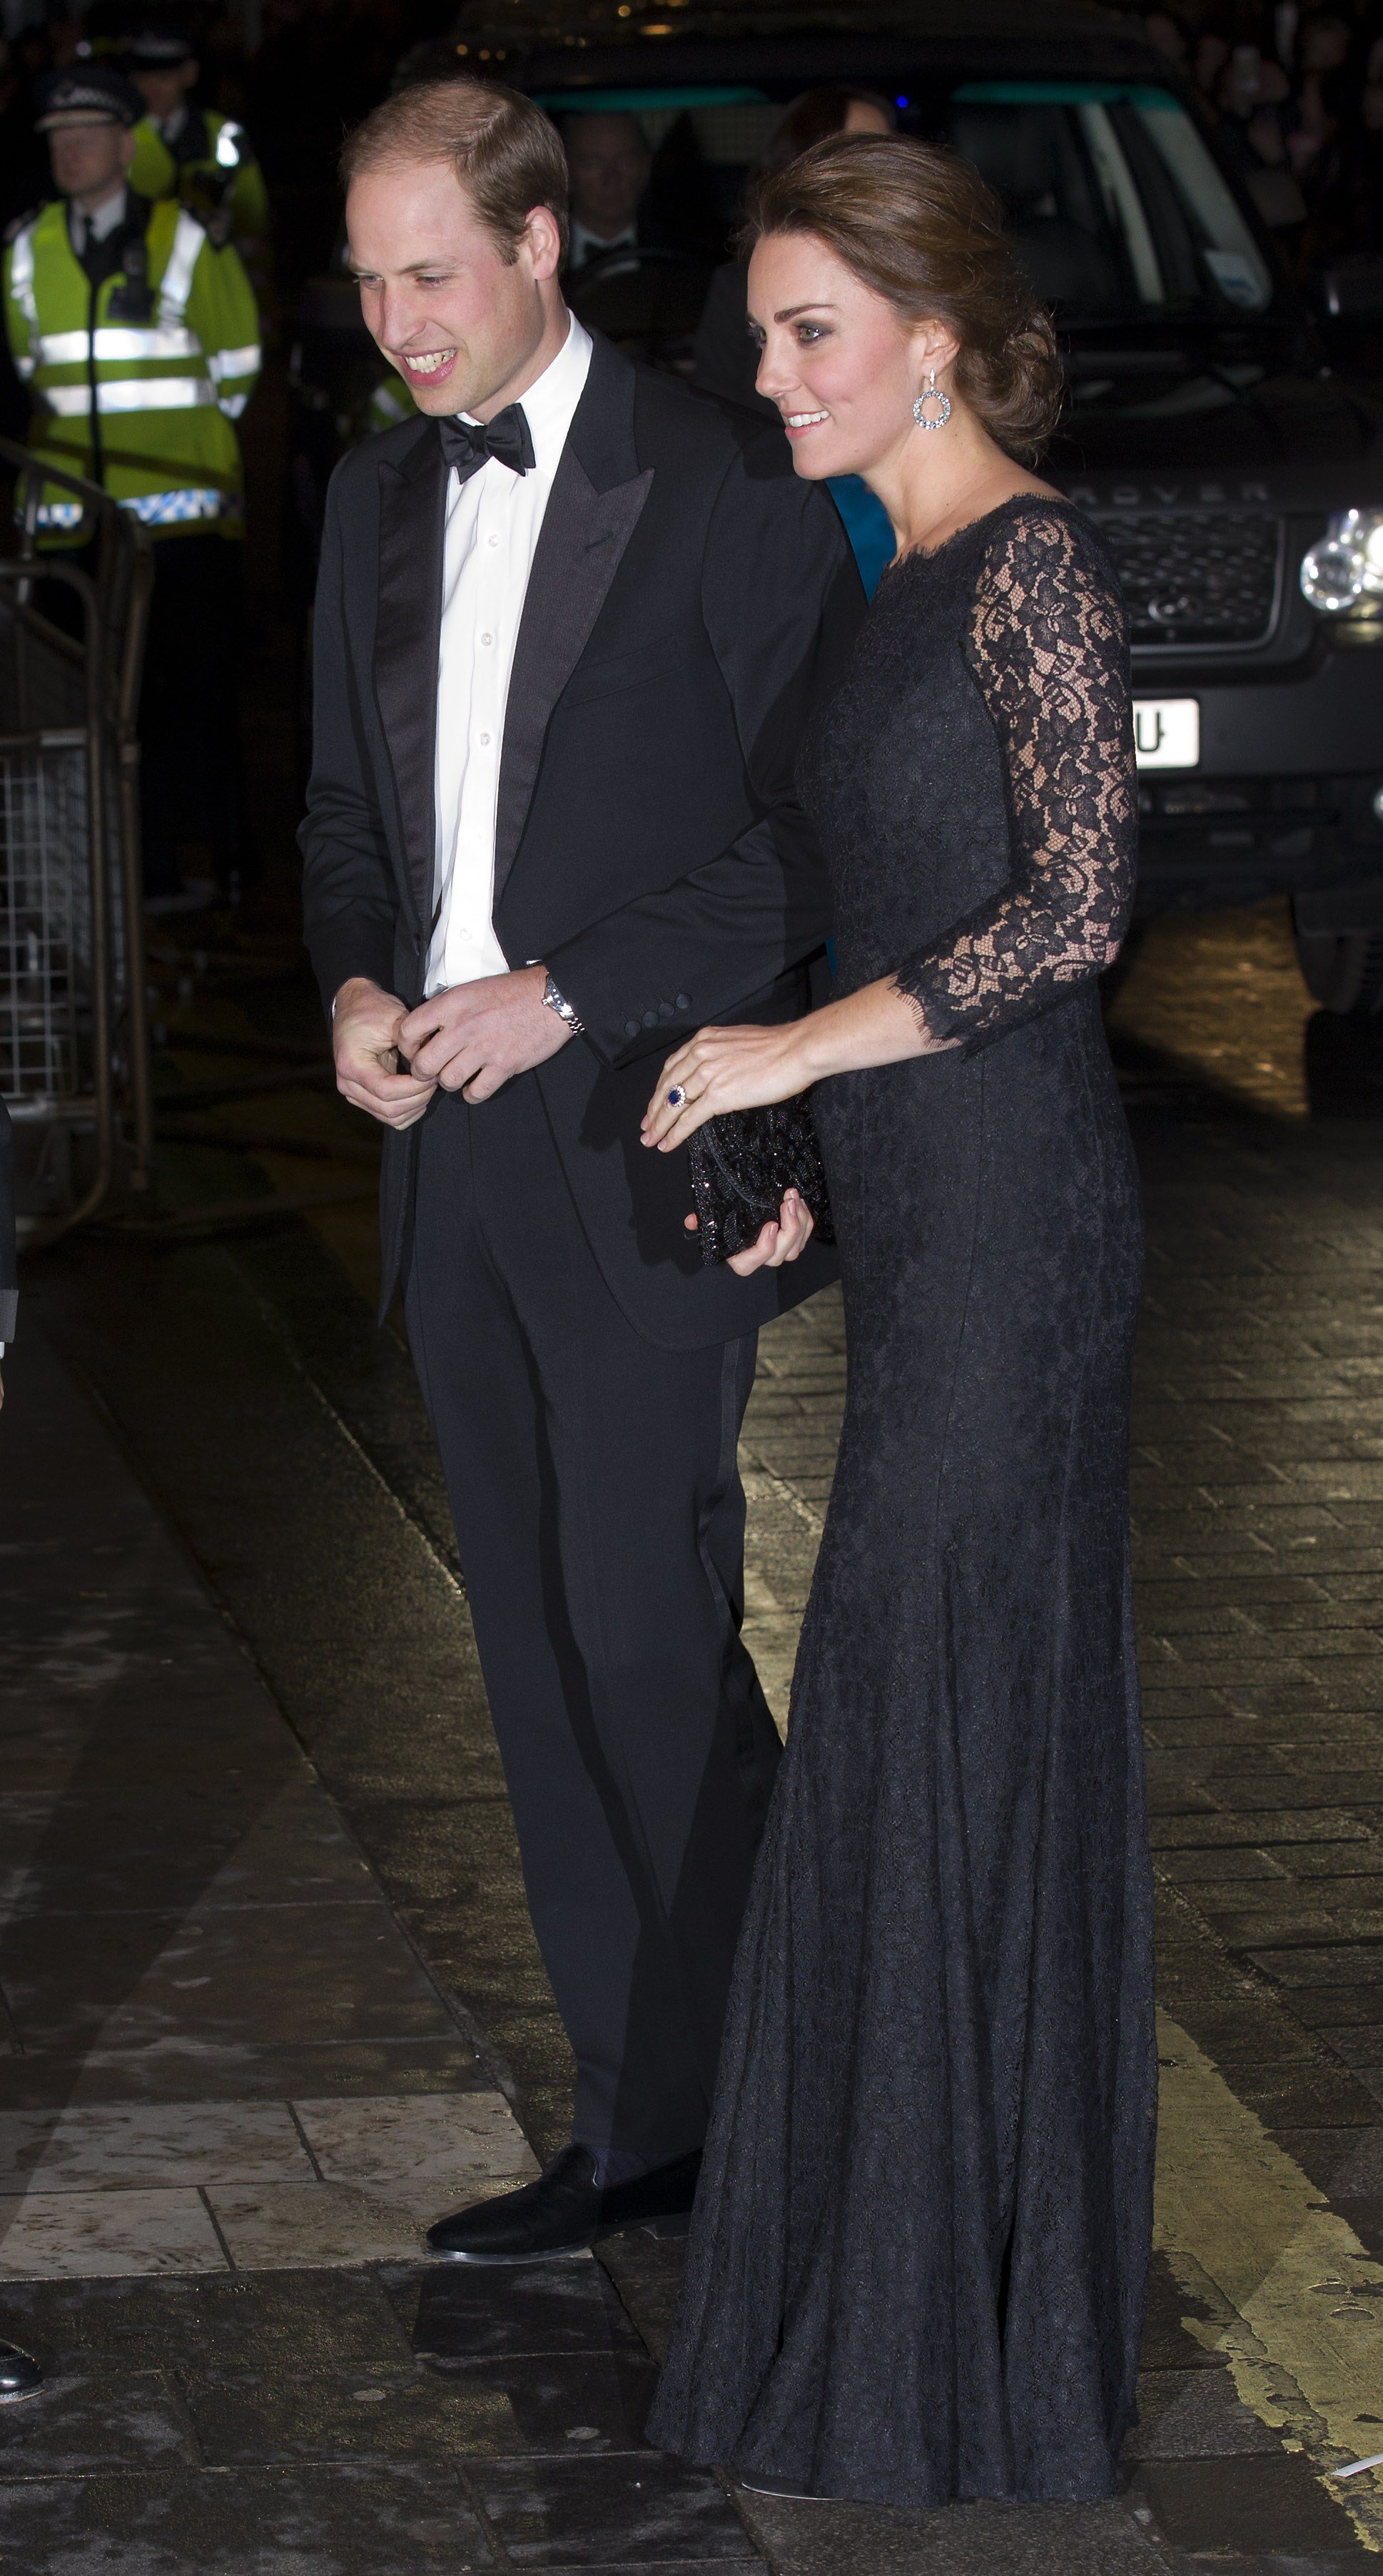 Catherine, Duchess of Cambridge and Prince William, Duke of Cambridge arrive to attend the Royal Variety Performance at the London Palladium Theatre on 13 November 2014.&nbsp;